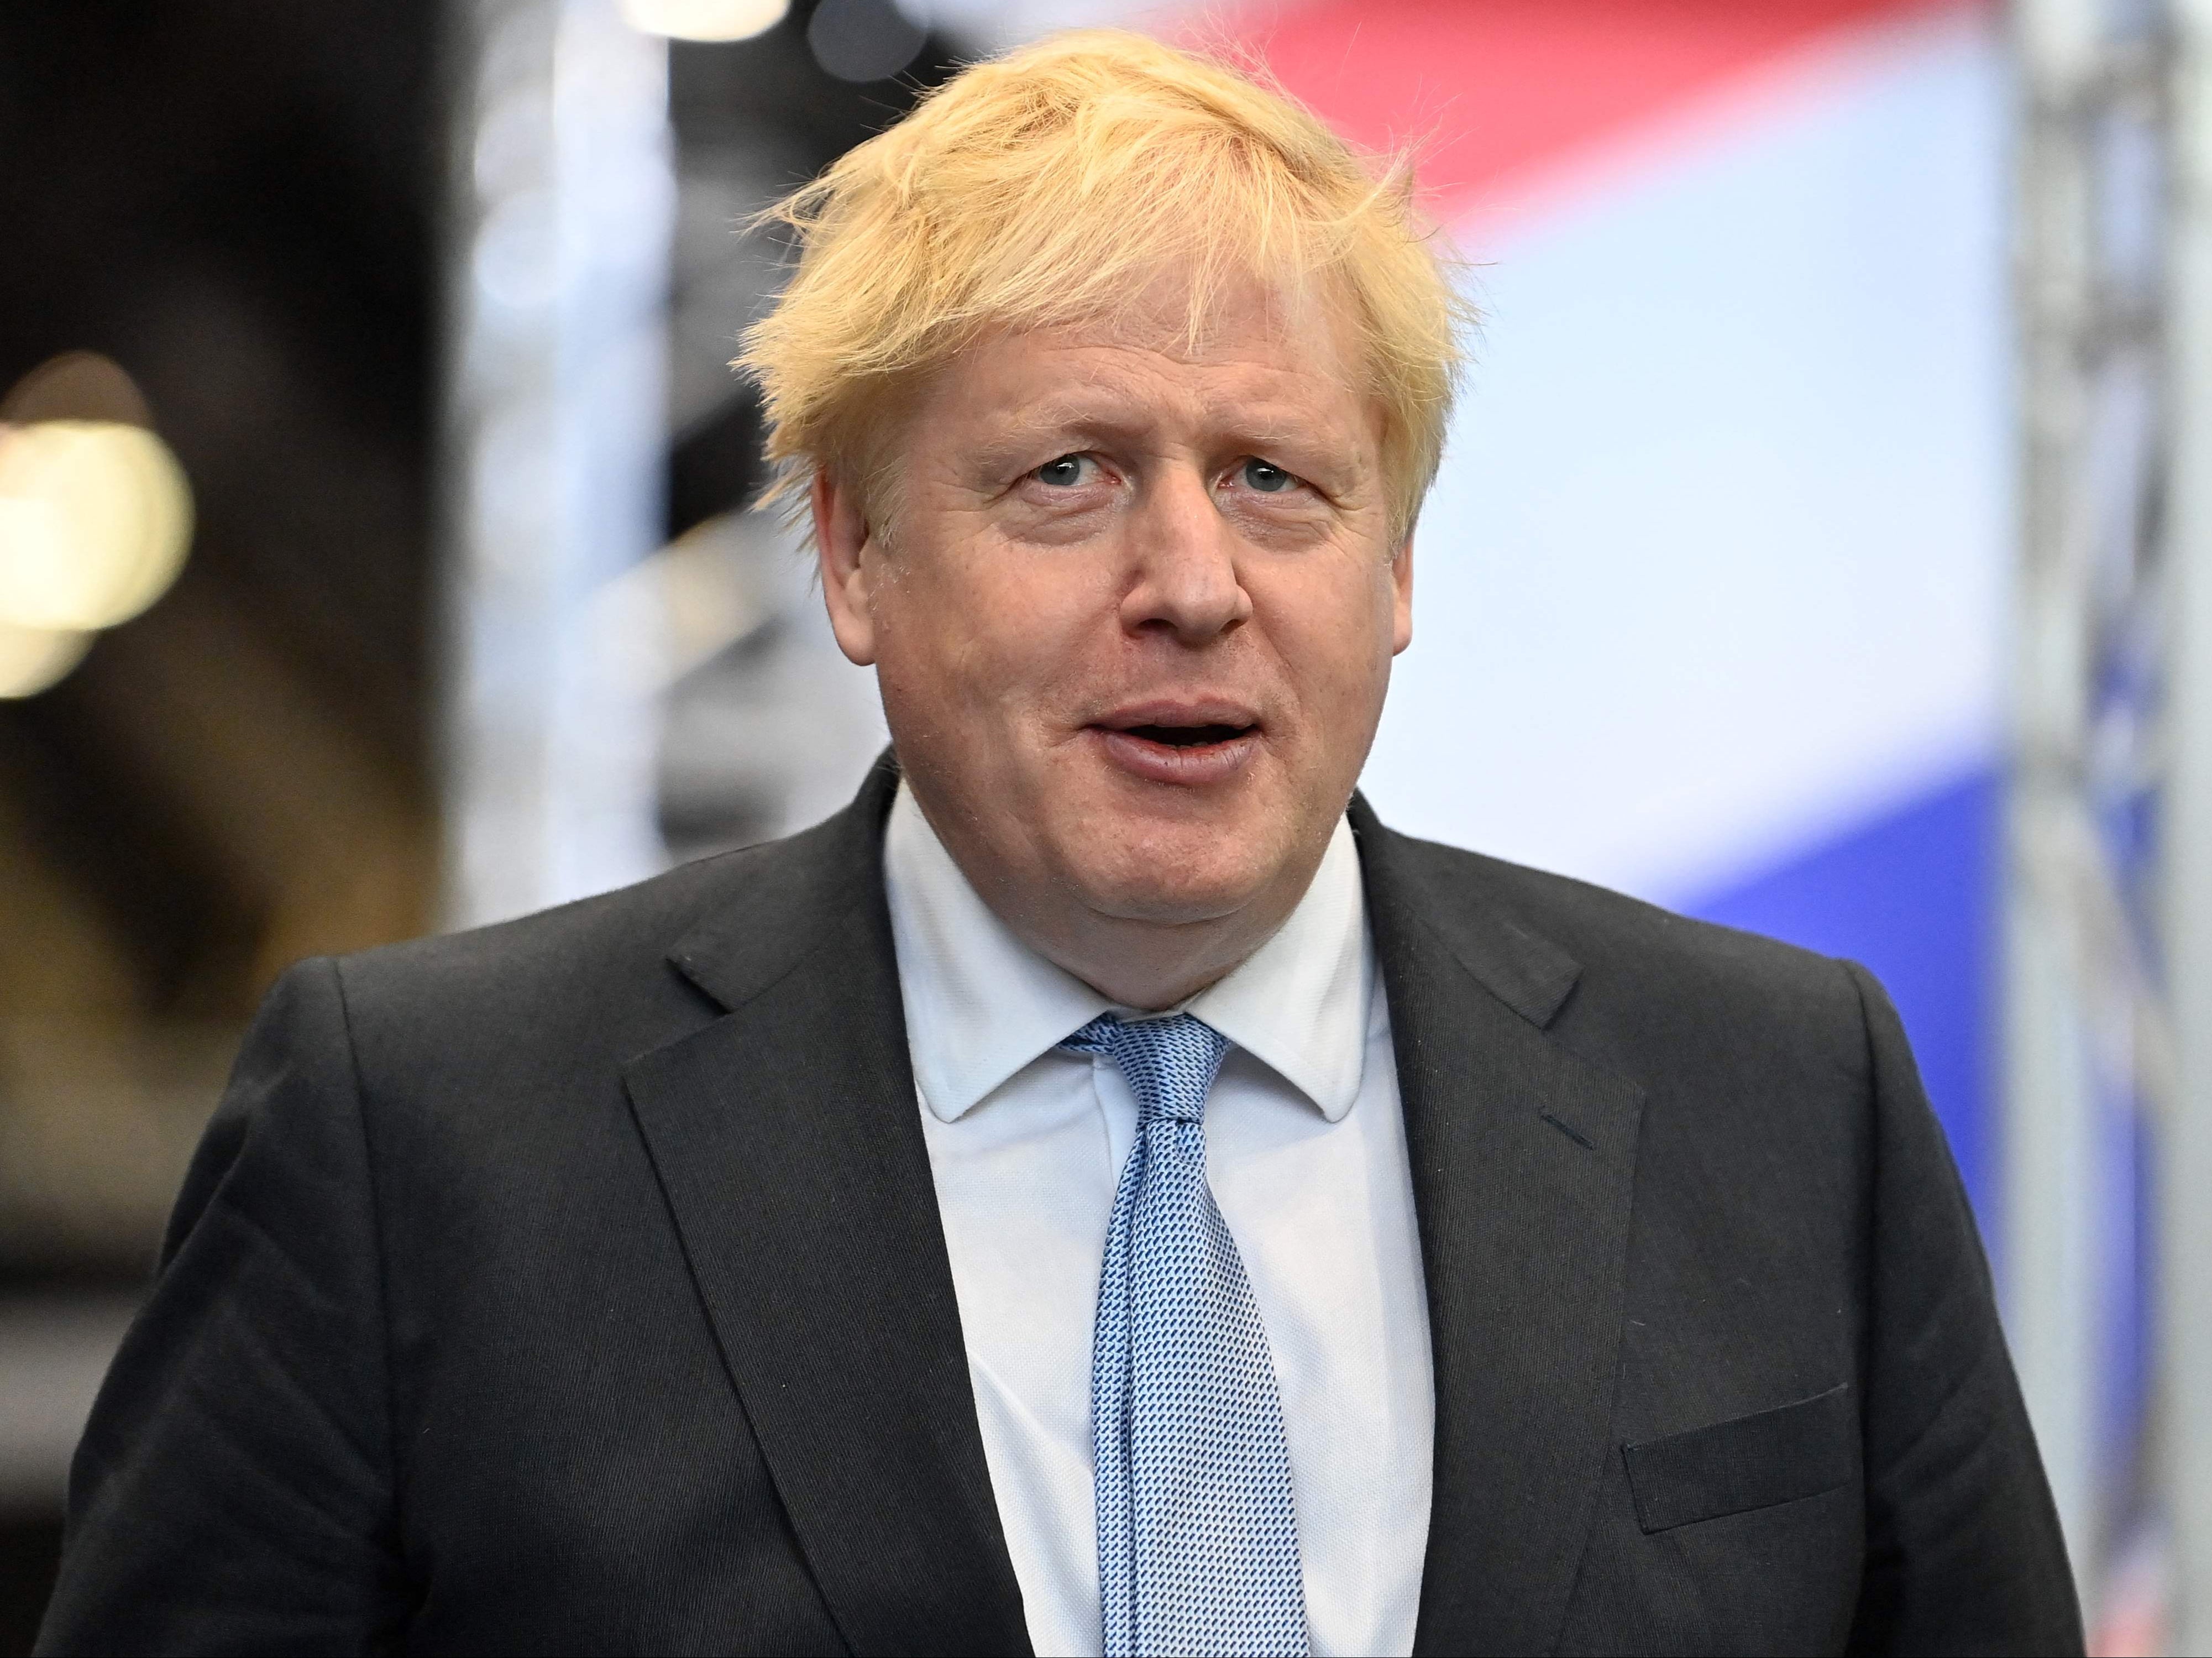 Boris Johnson has described the challenges faced by the UK economy as a “period of adjustment”.